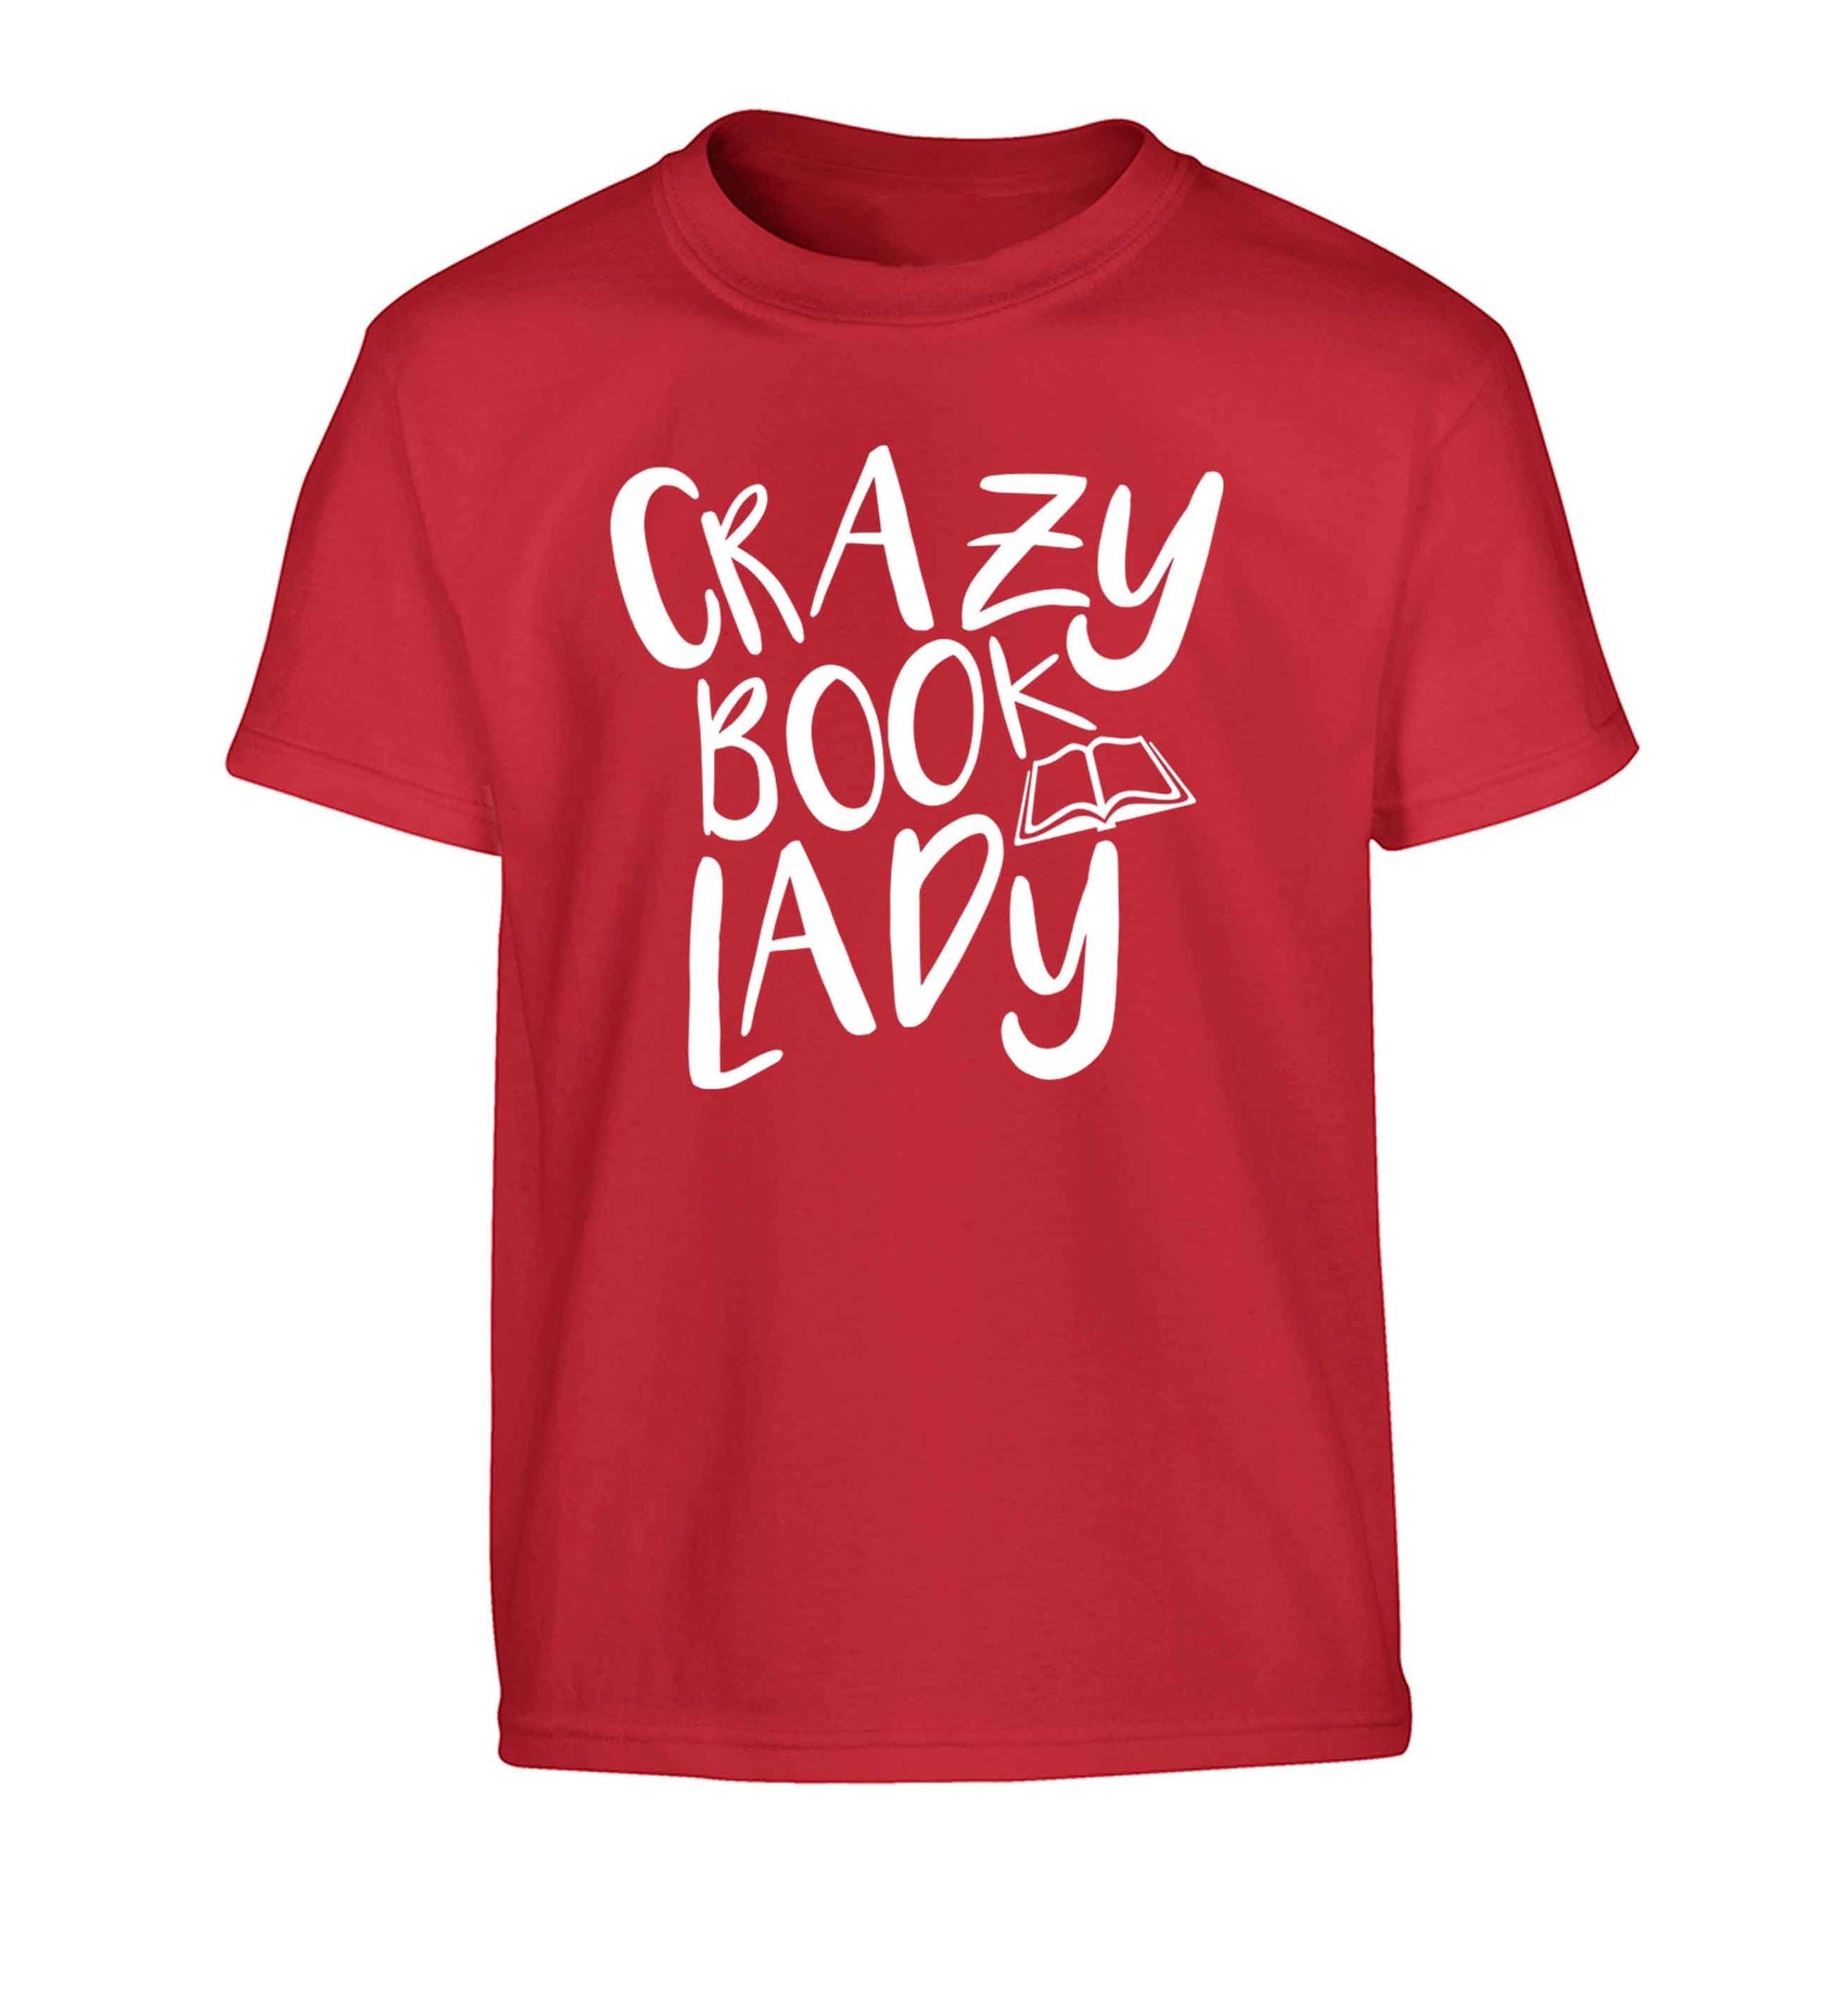 Crazy book lady Children's red Tshirt 12-13 Years